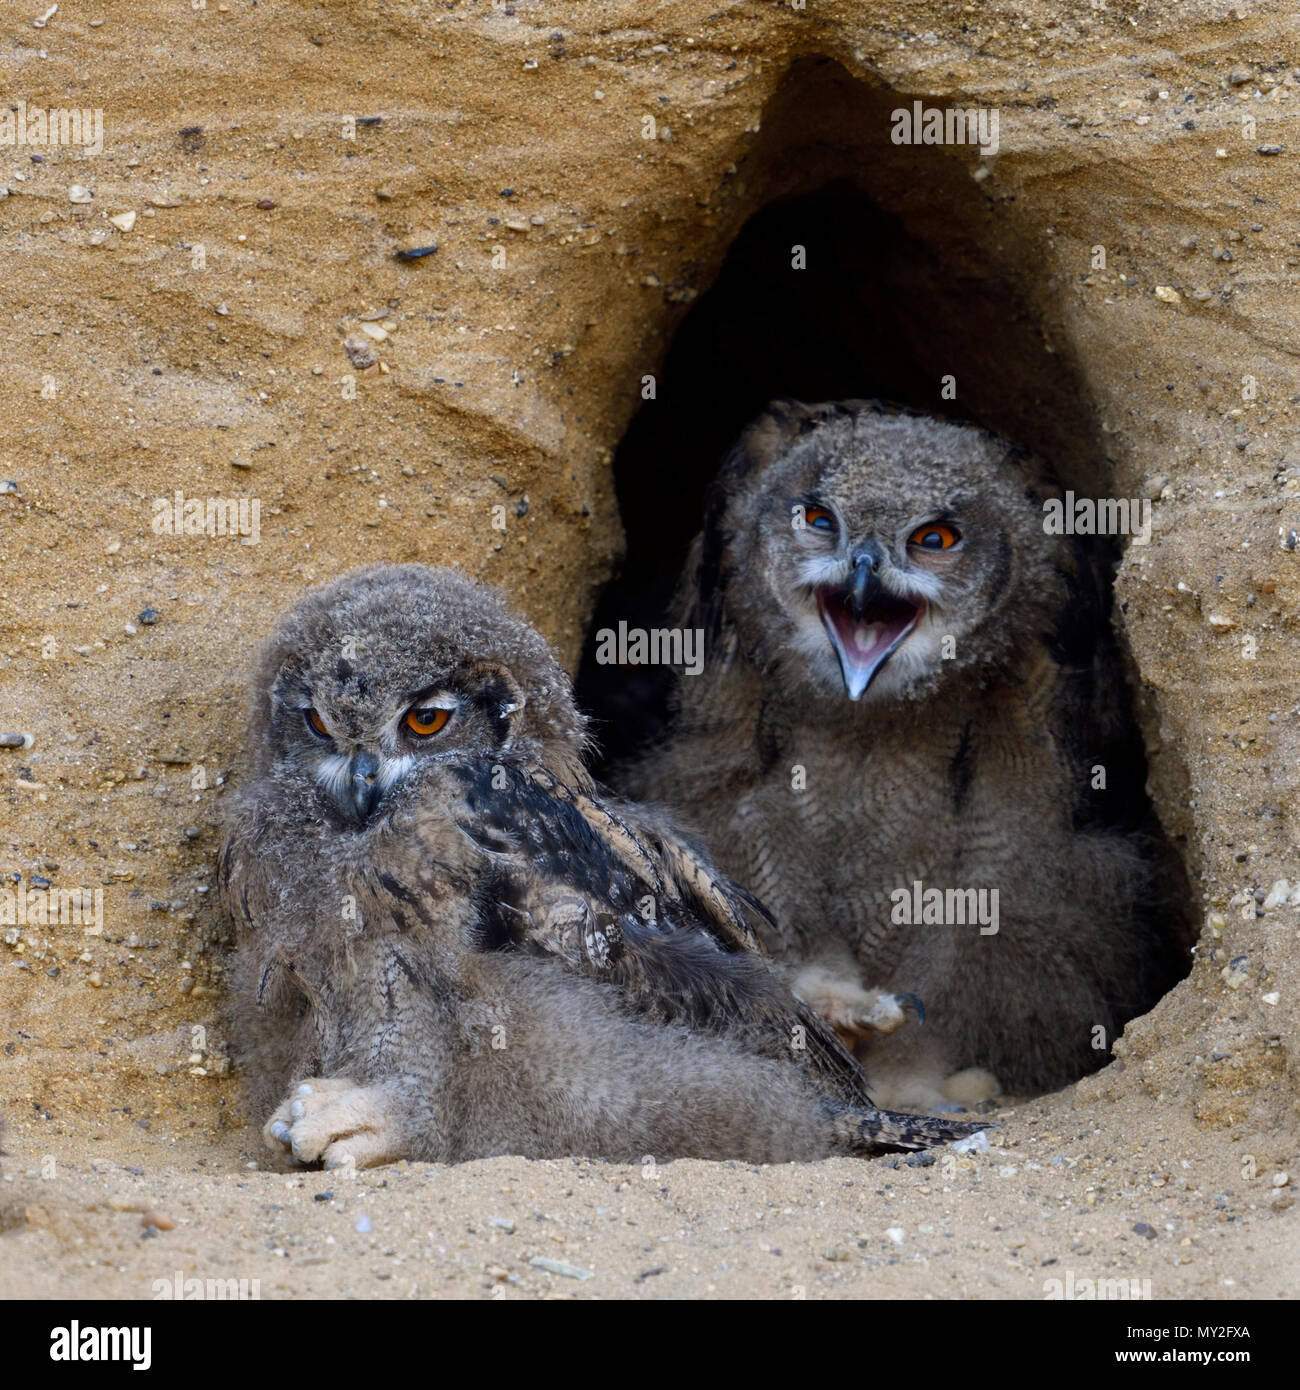 Eurasian Eagle Owls / Europaeische Uhus ( Bubo bubo ), quarreling chicks with the carcass of hedgehog in front at their nest burrow, funny, wildlife,  Stock Photo